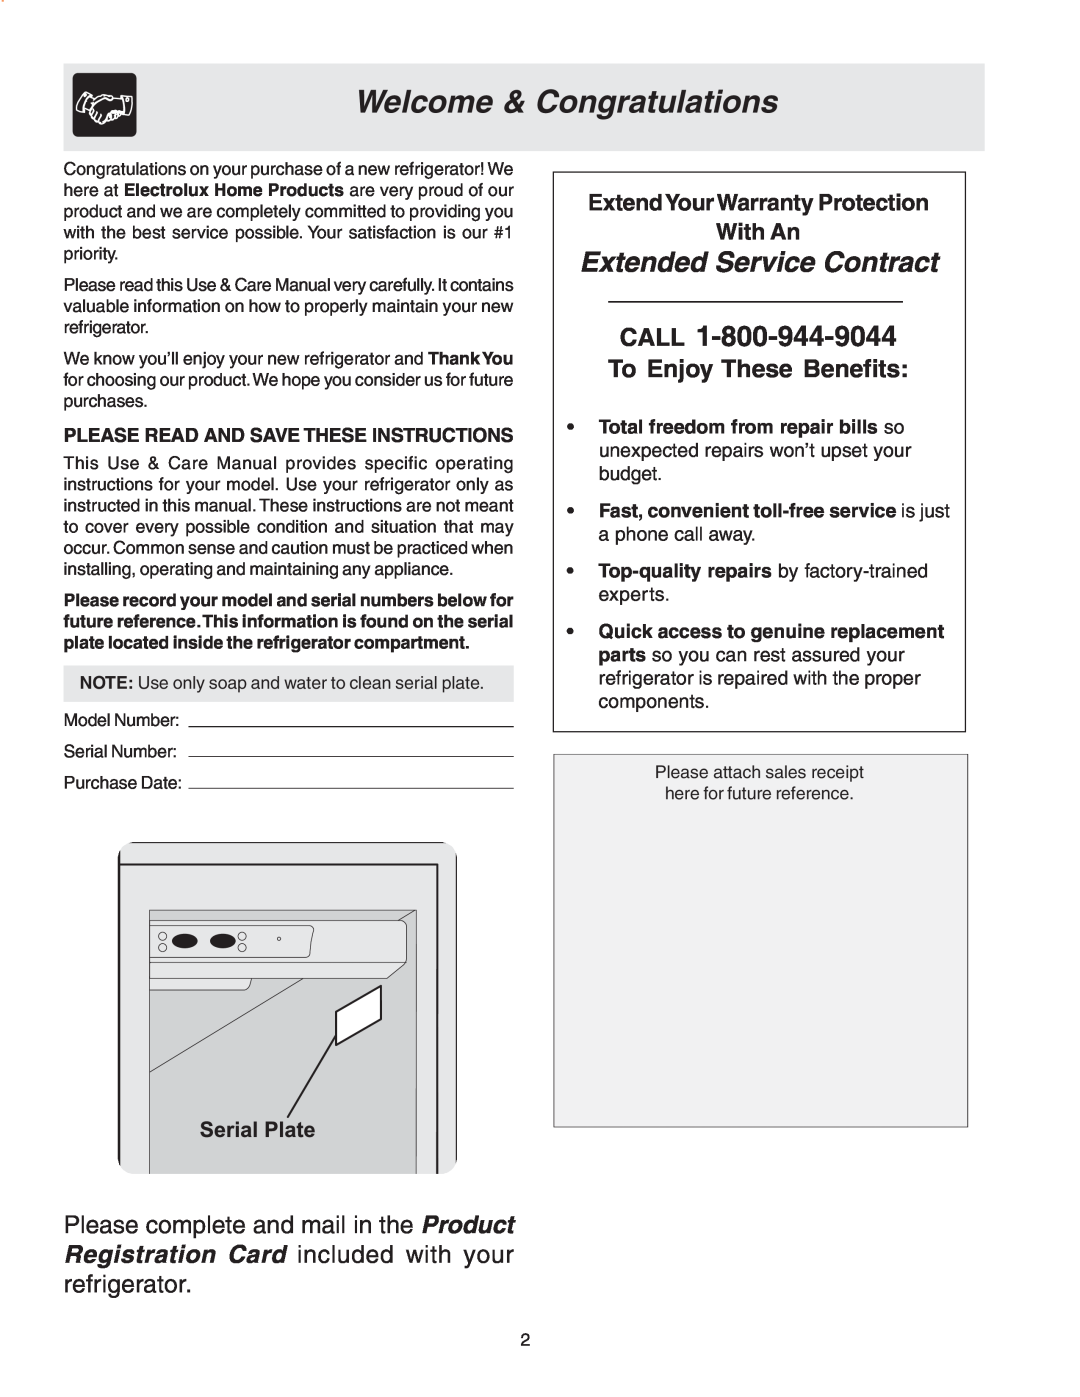 Frigidaire Compact Refrigerator manual Welcome & Congratulations, Extended Service Contract, Call, To Enjoy These Benefits 